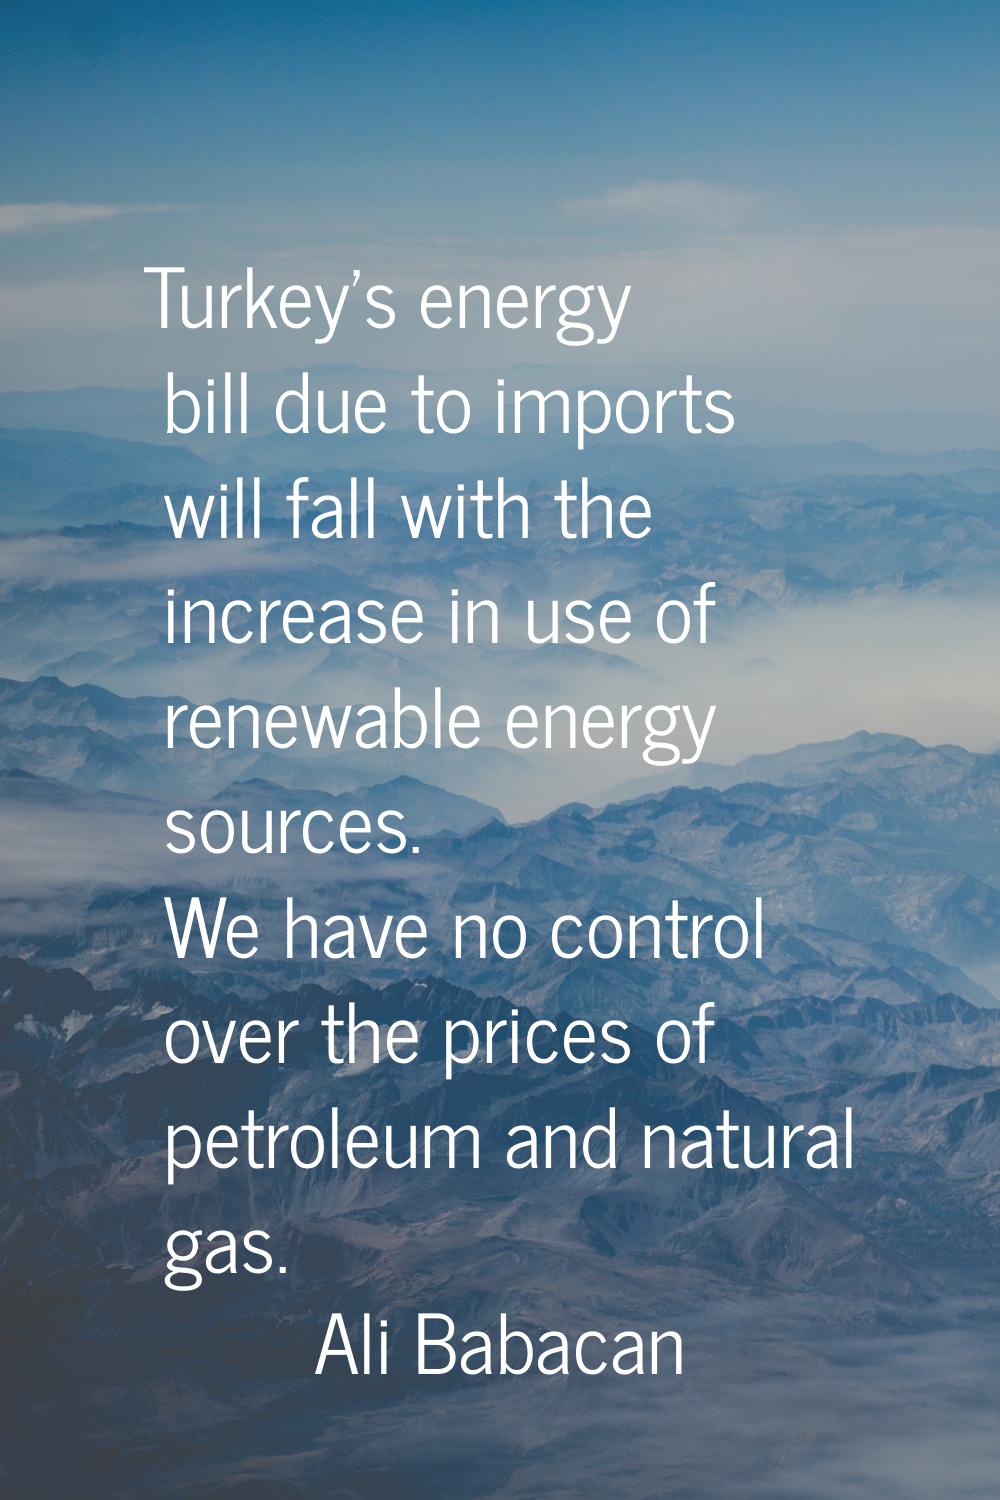 Turkey's energy bill due to imports will fall with the increase in use of renewable energy sources.